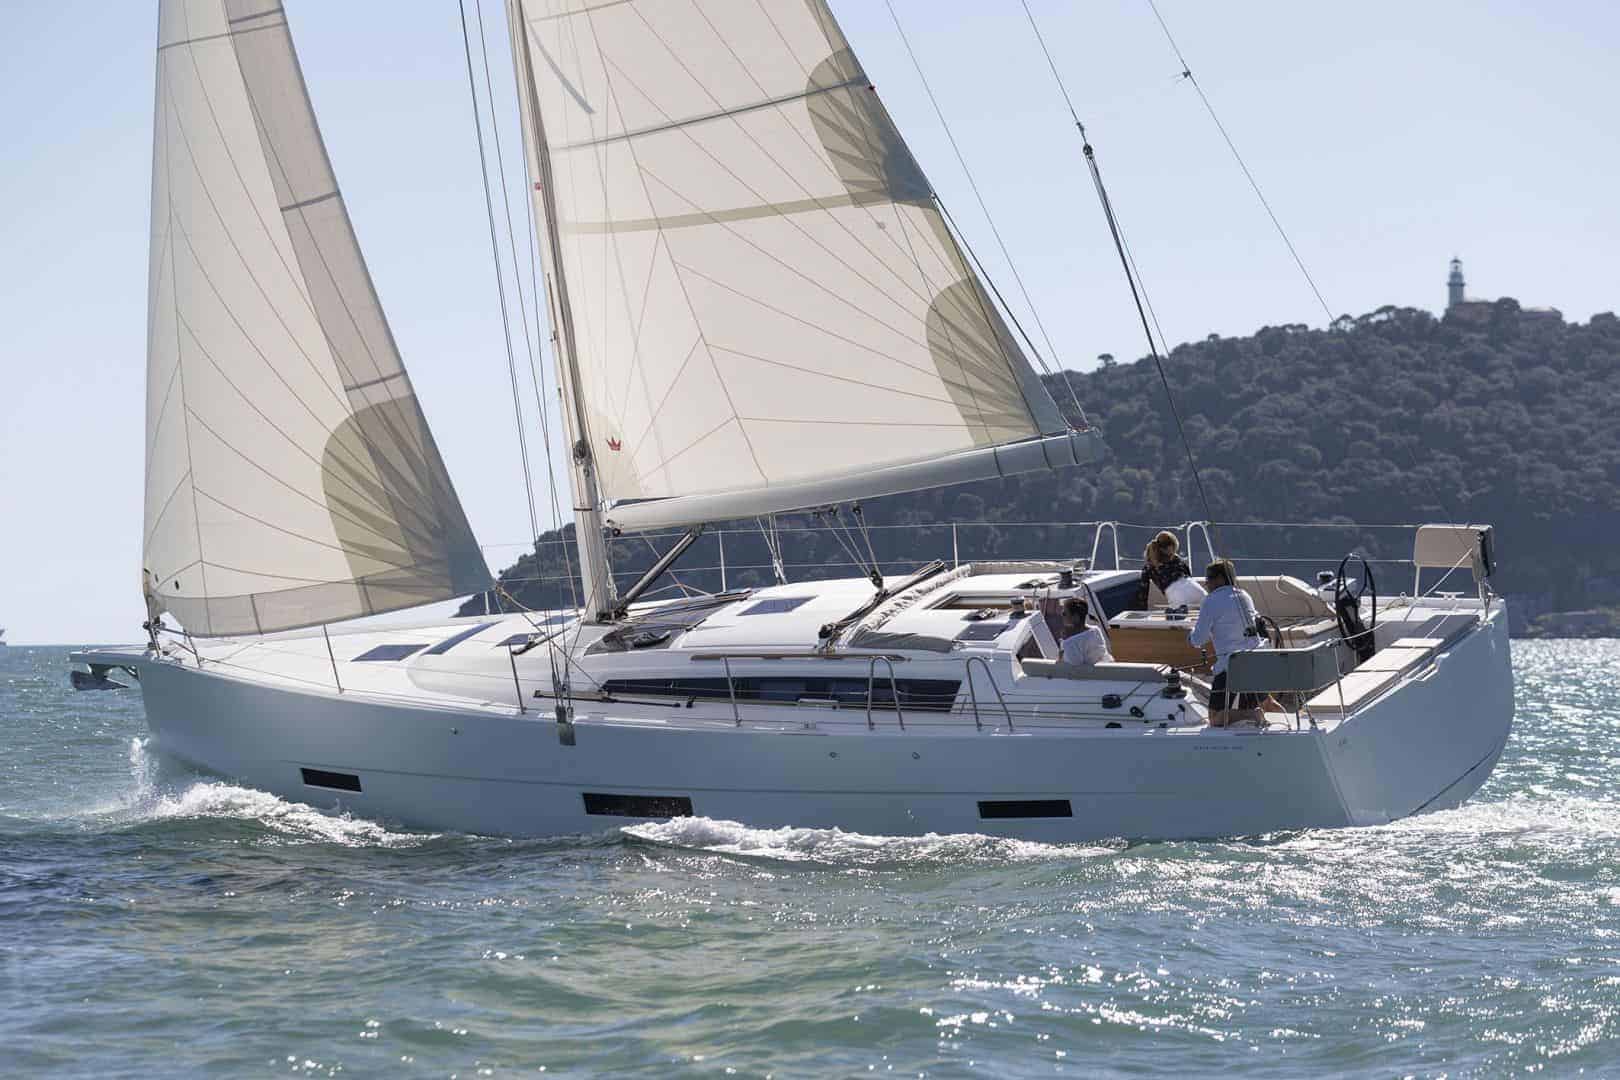 Dufour 430 Grand Large in action with wind in its sail, going fast ahead on a sunny day